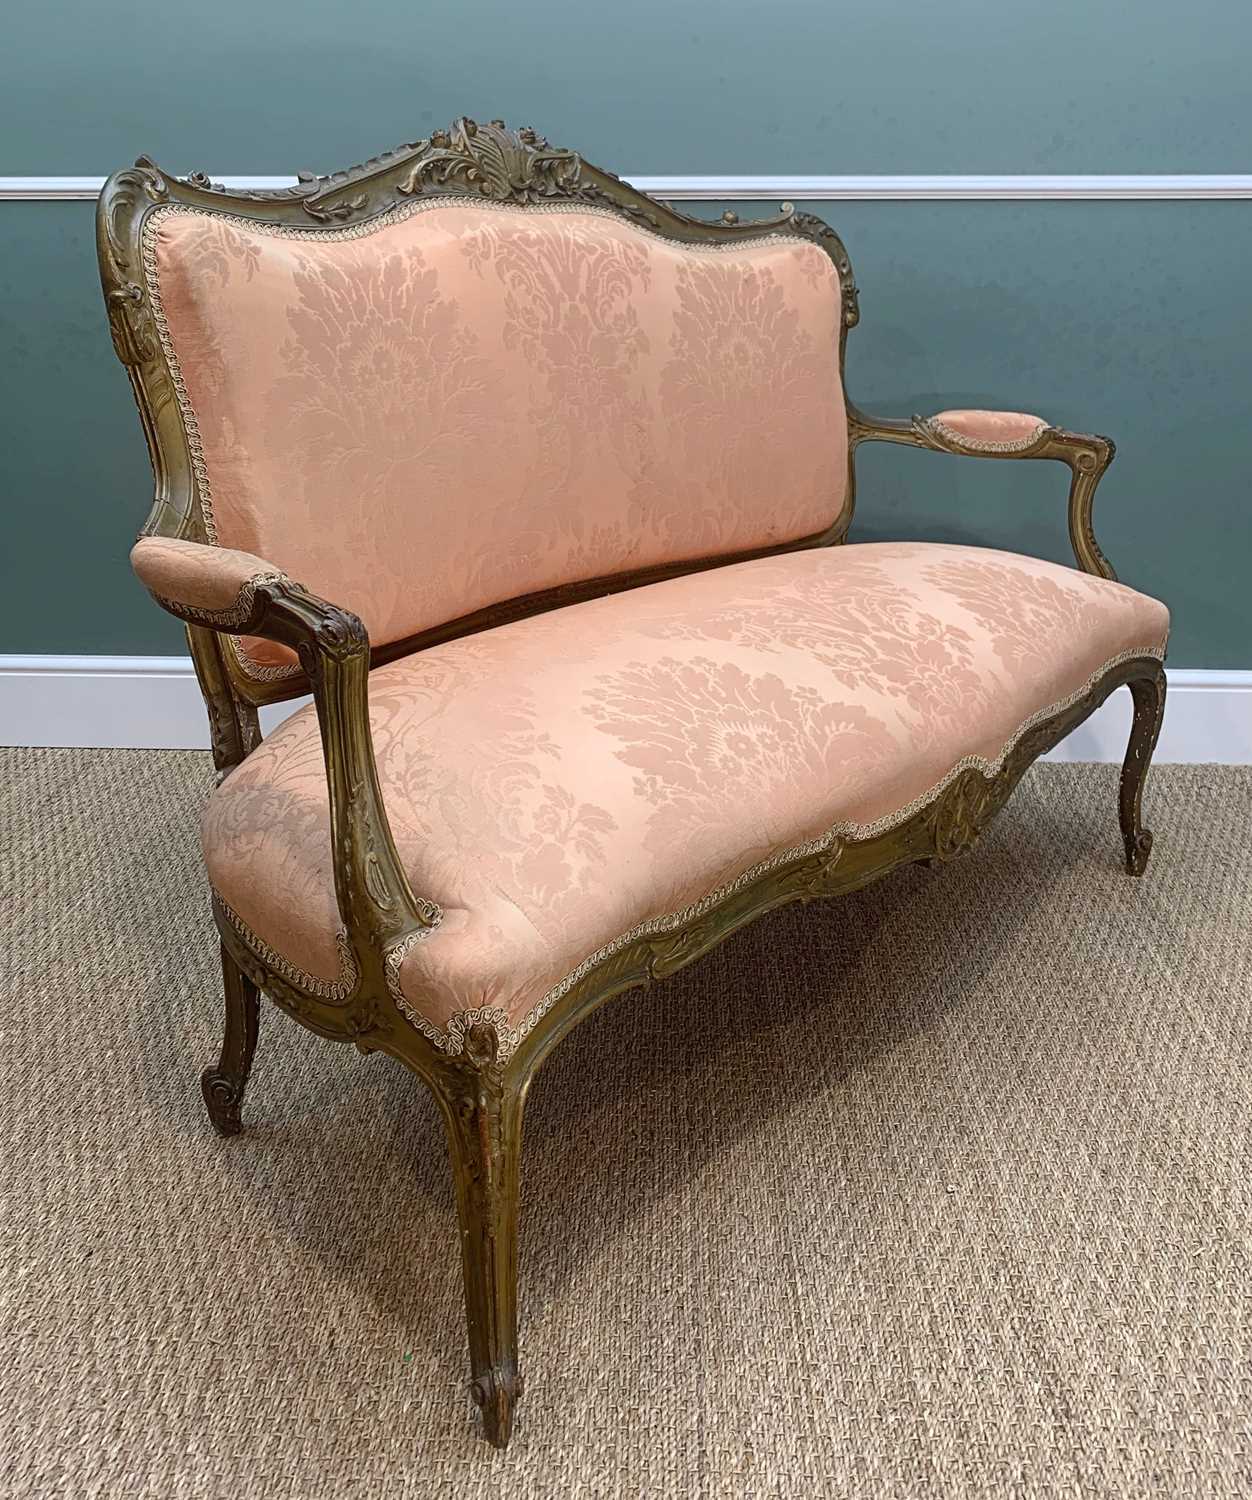 LOUIS XV-STYLE GILTWOOD SALON SUITE, comprising canape and pair of fauteuils, apricot damask - Image 4 of 7